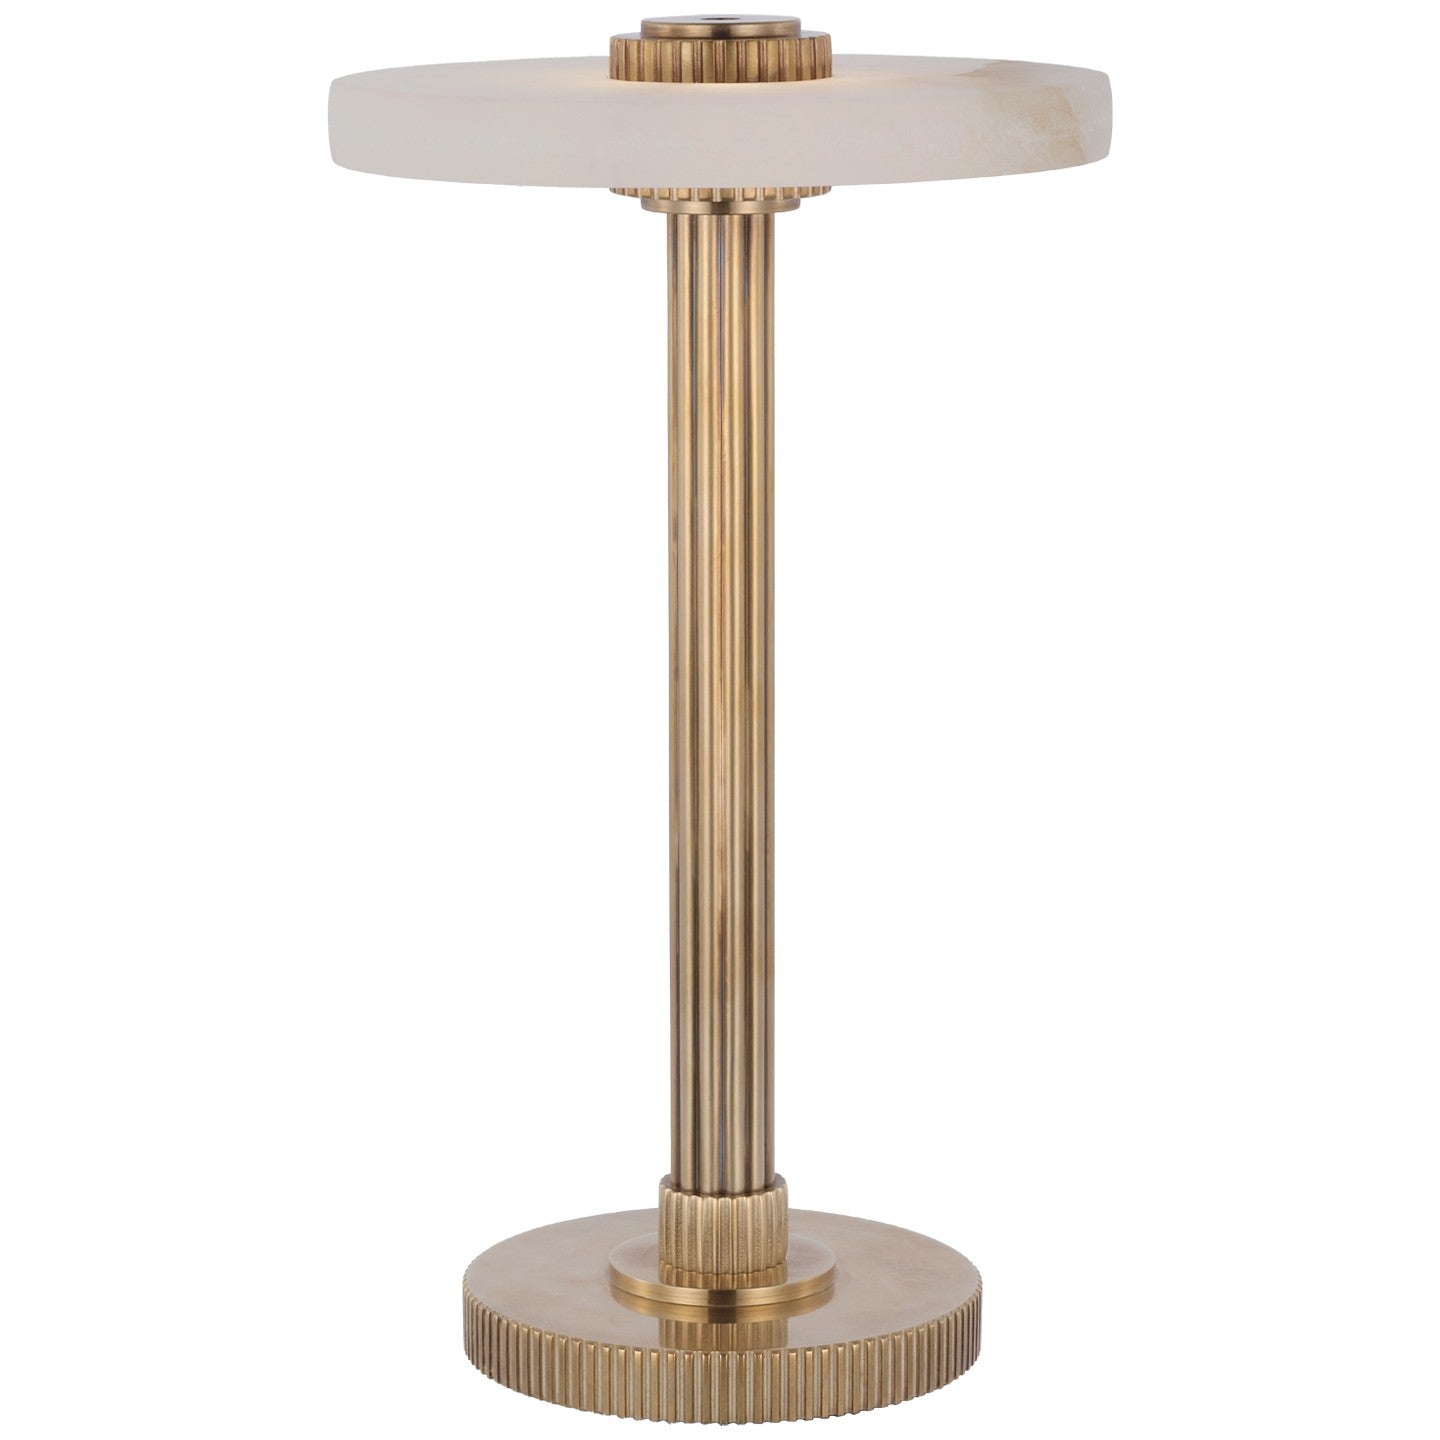 Visual Comfort Signature - S 3150HAB/ALB - LED Accent Lamp - Aran - Hand-Rubbed Antique Brass and Alabaster